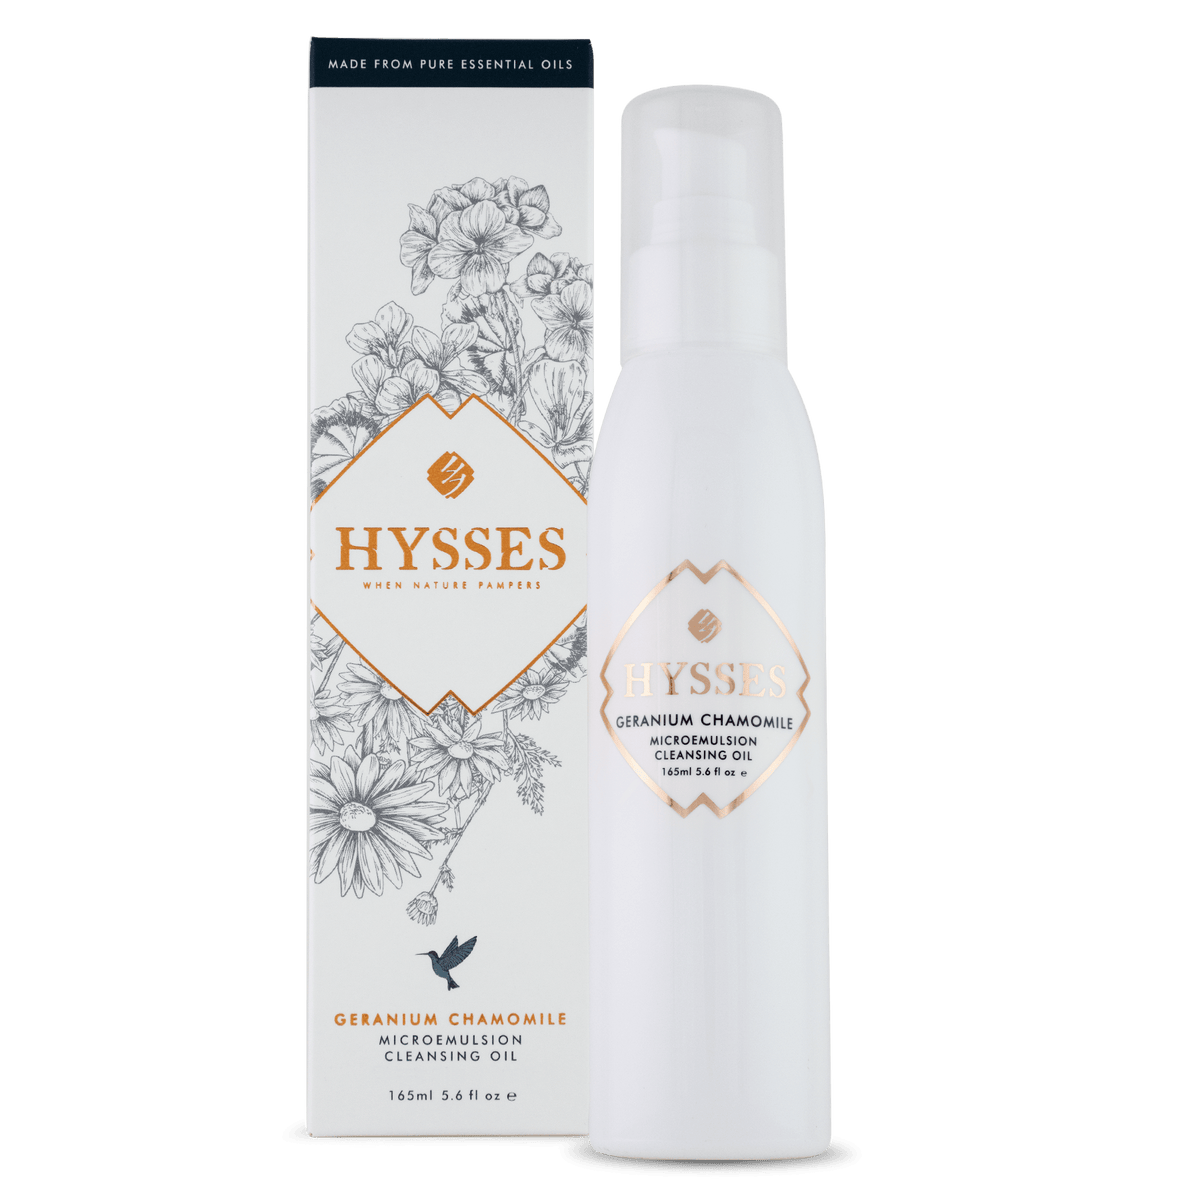 Hysses Face Care Facial Cleansing Oil Microemulsion Geranium Chamomile, 165ml